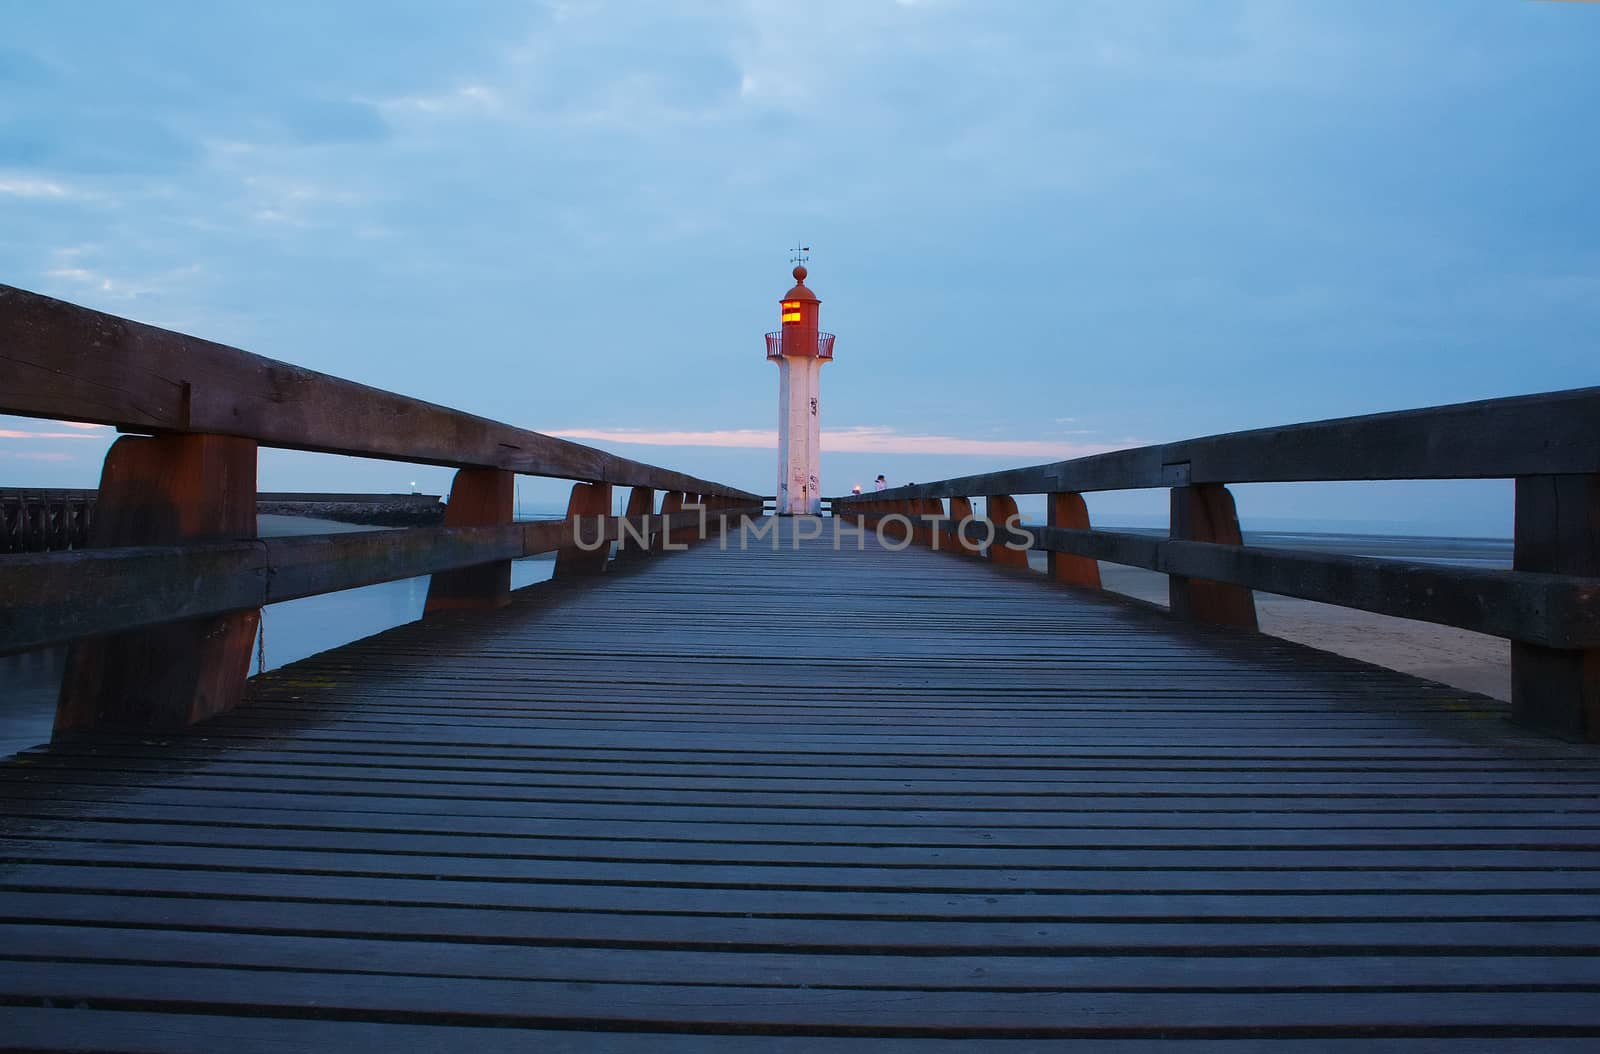 Walkway and lighthouse at sunset by totony